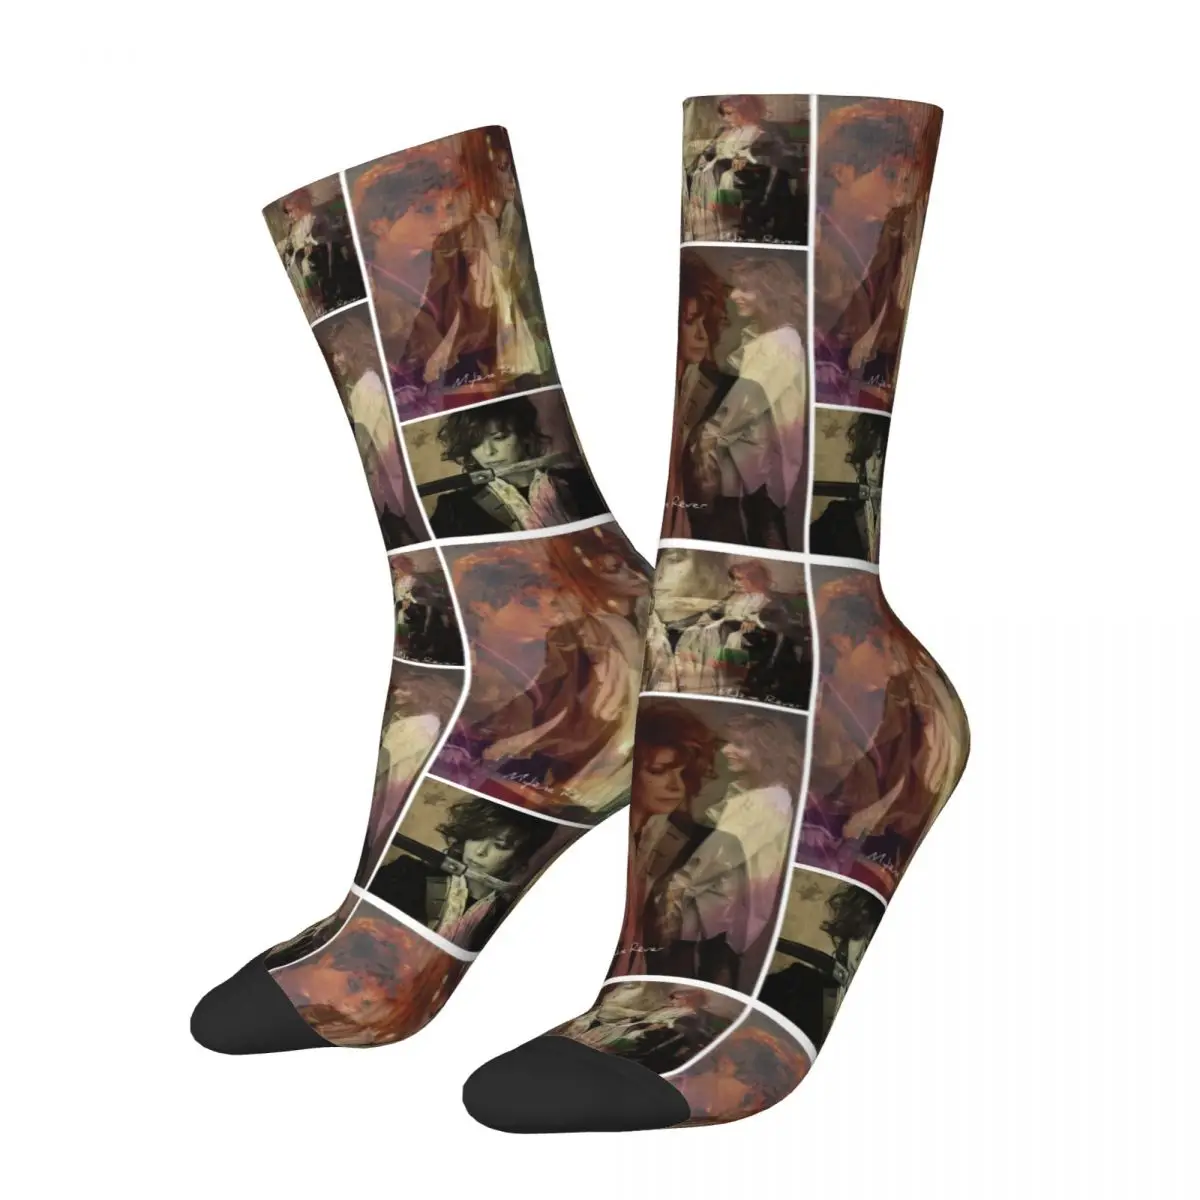 

Casual Mylene Farmer Collage Sports Crew Socks Super Soft Middle Tube Thing Christmas Gifts for Unisex Sweat Absorbing